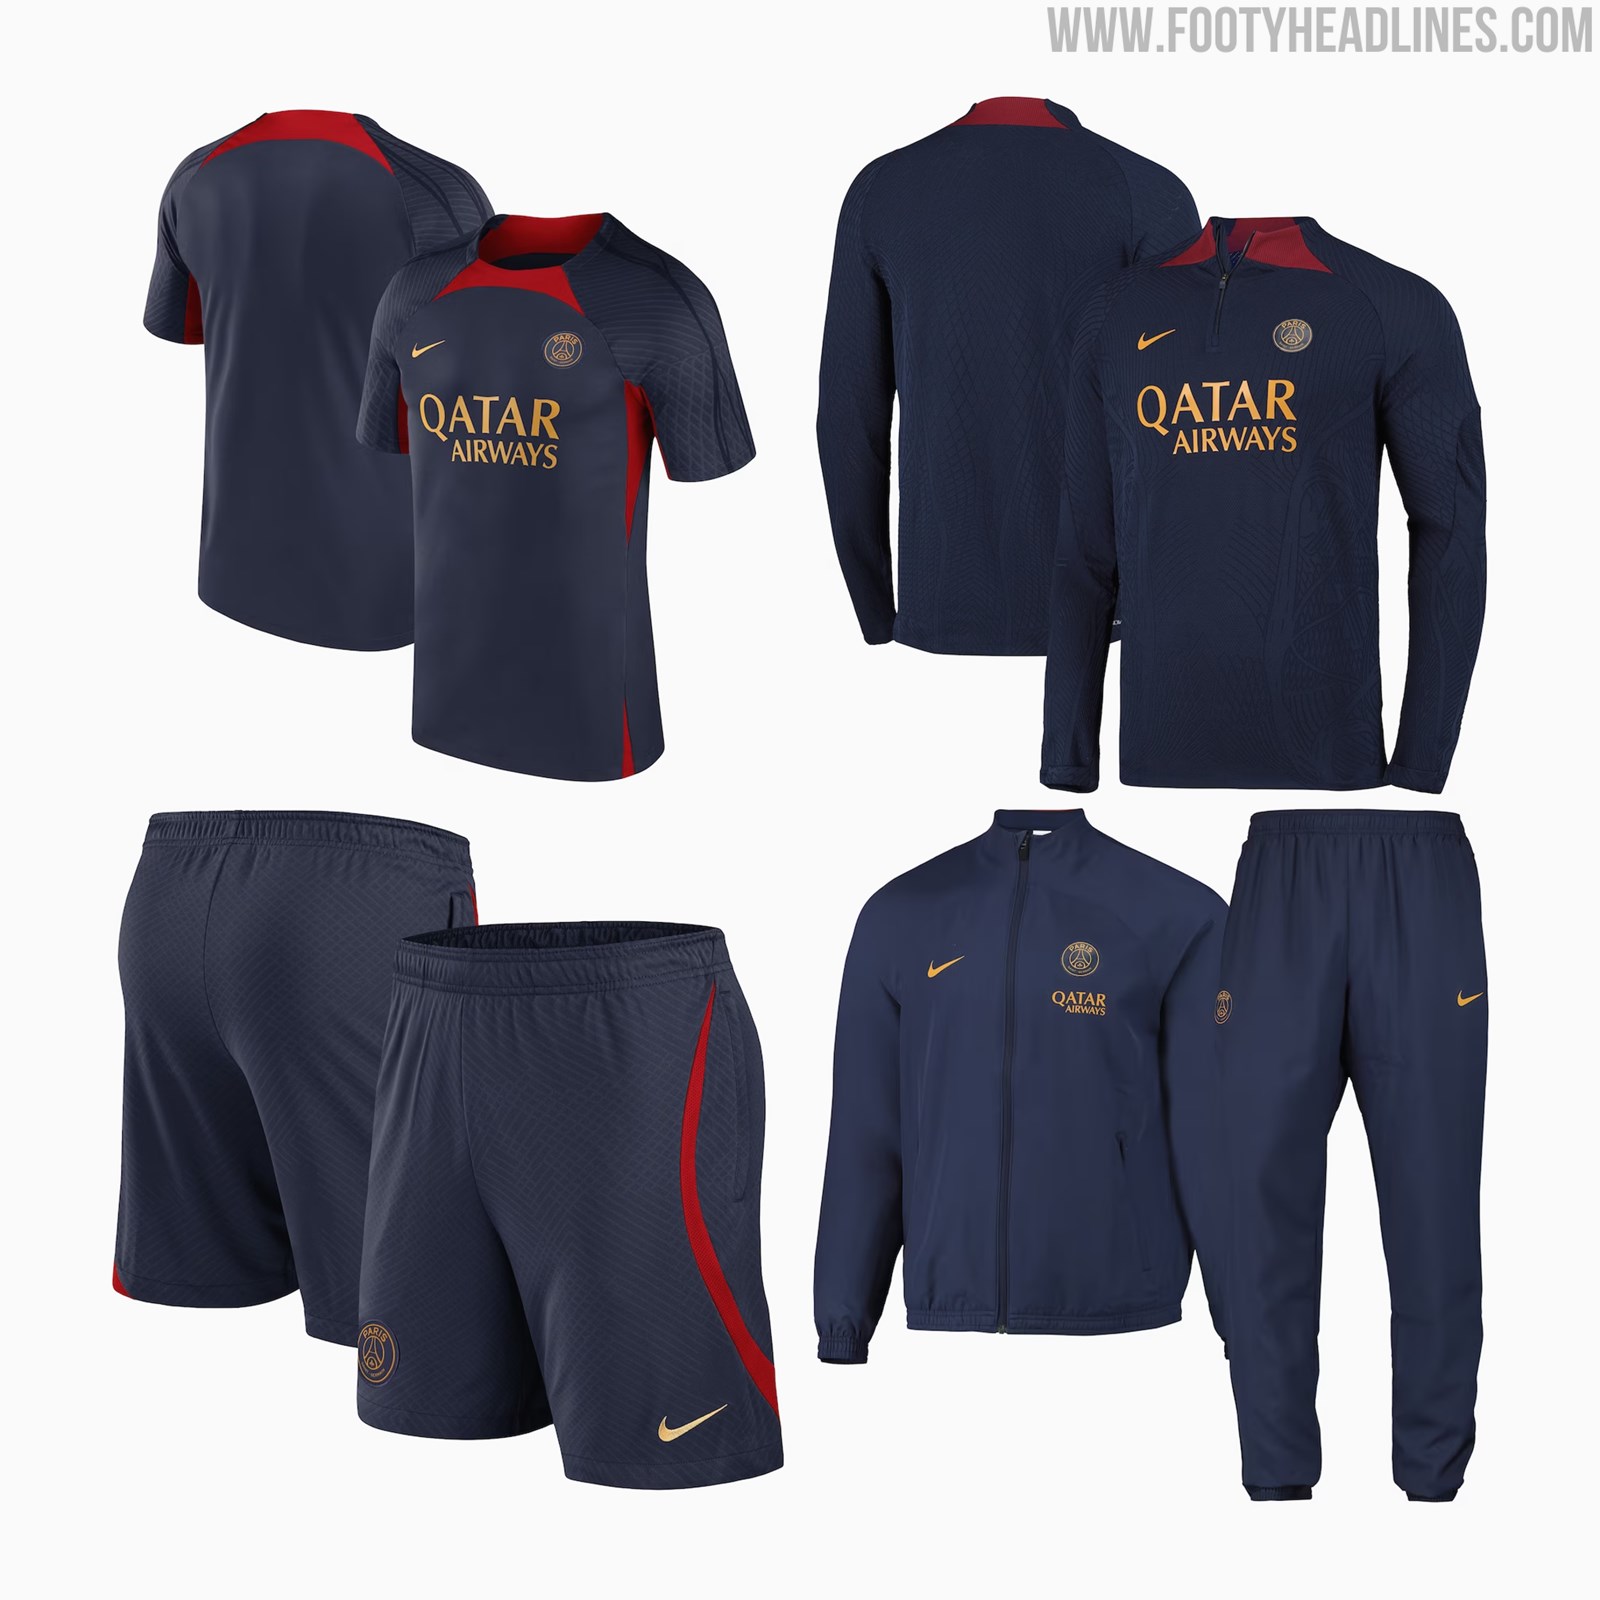 Mucama Subvención Interior Magnificent PSG 23-24 Training Kits Released/Leaked - Footy Headlines